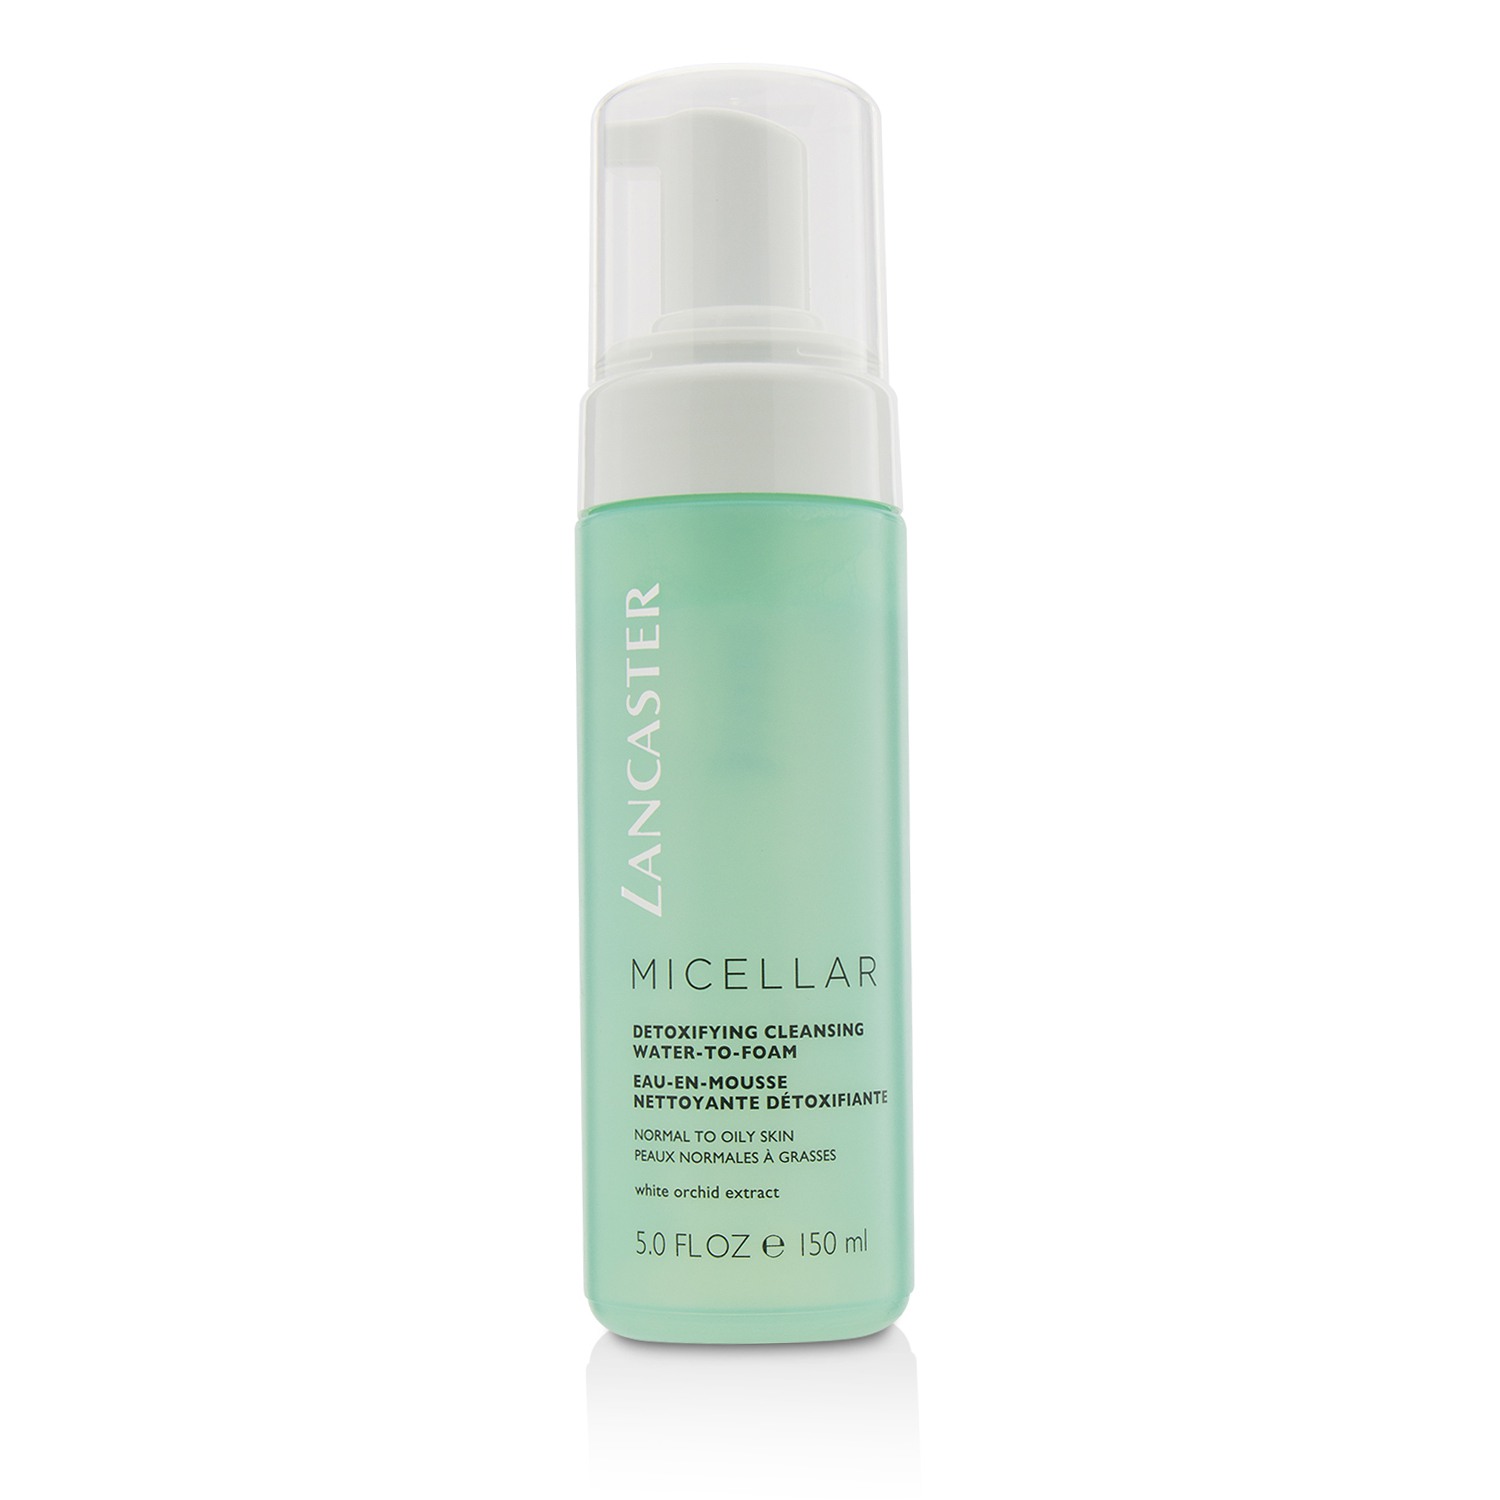 Micellar Detoxifying Cleansing Water-To-Foam - Normal to Oily Skin Including Sensitive Skin Lancaster Image